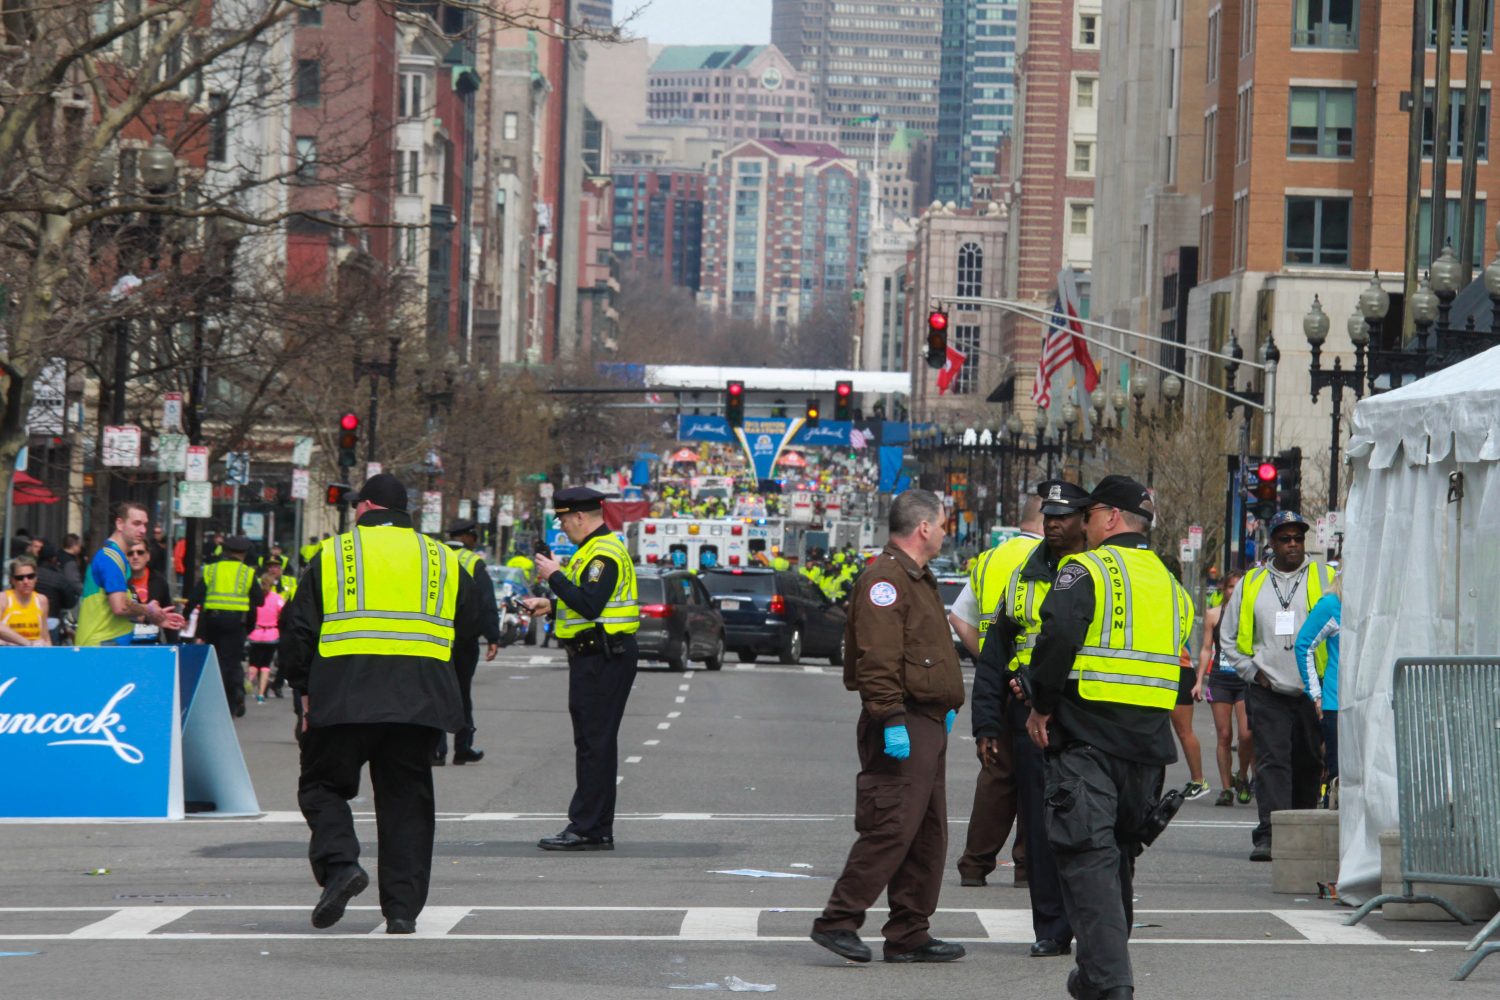 Local, State, and Federal agencies respond to a blast at the finish line of the Boston Marathon on Monday, April 15, 2013, in Boston, Massachusetts. (Kevin Wiles, Jr./Zuma Press/MCT)